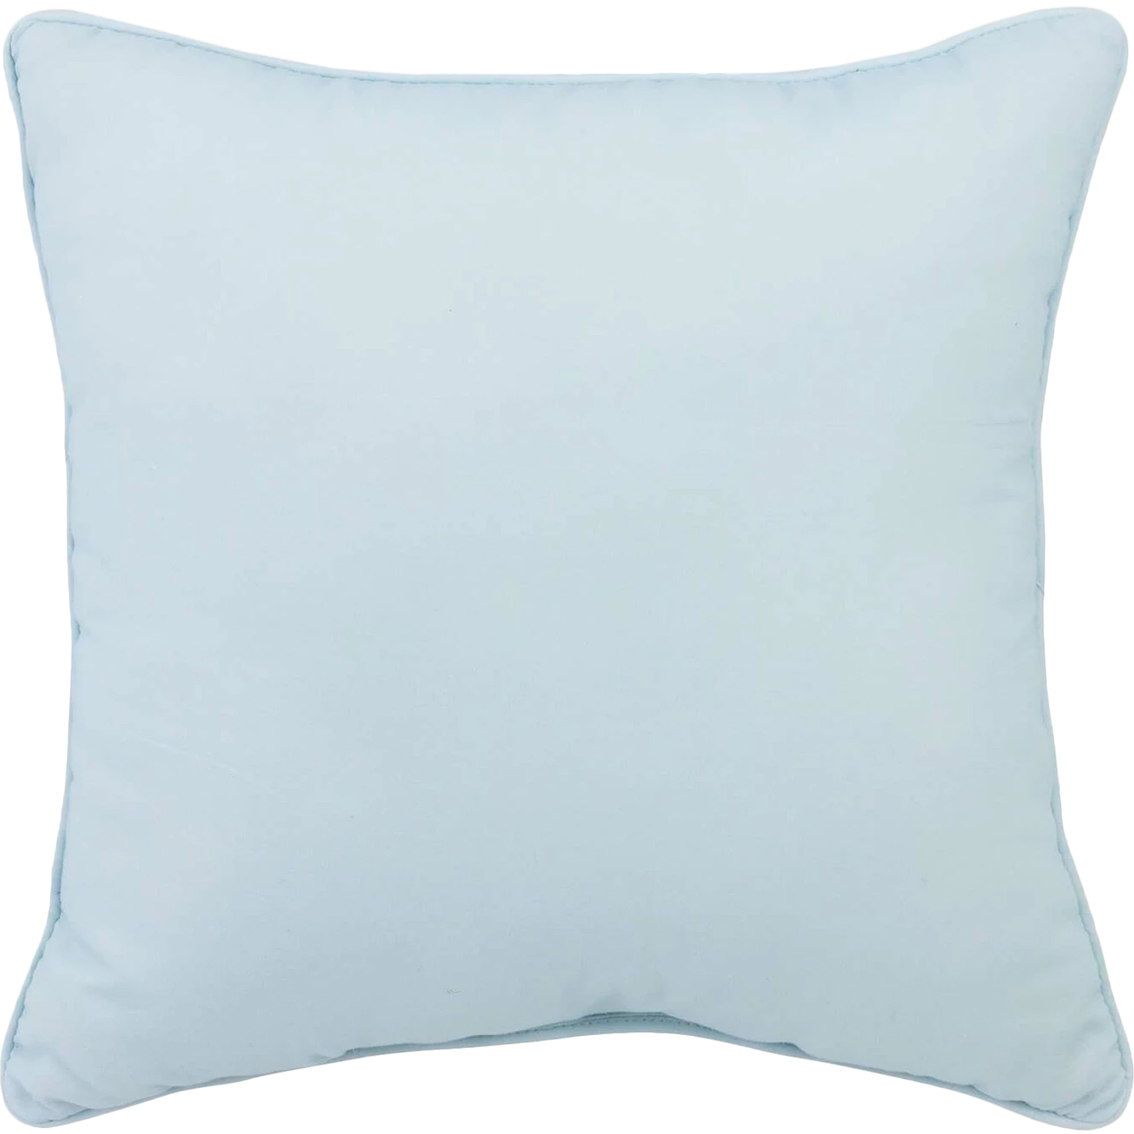 Croscill Angelina 18 x 18 Square Pillow - Image 2 of 4